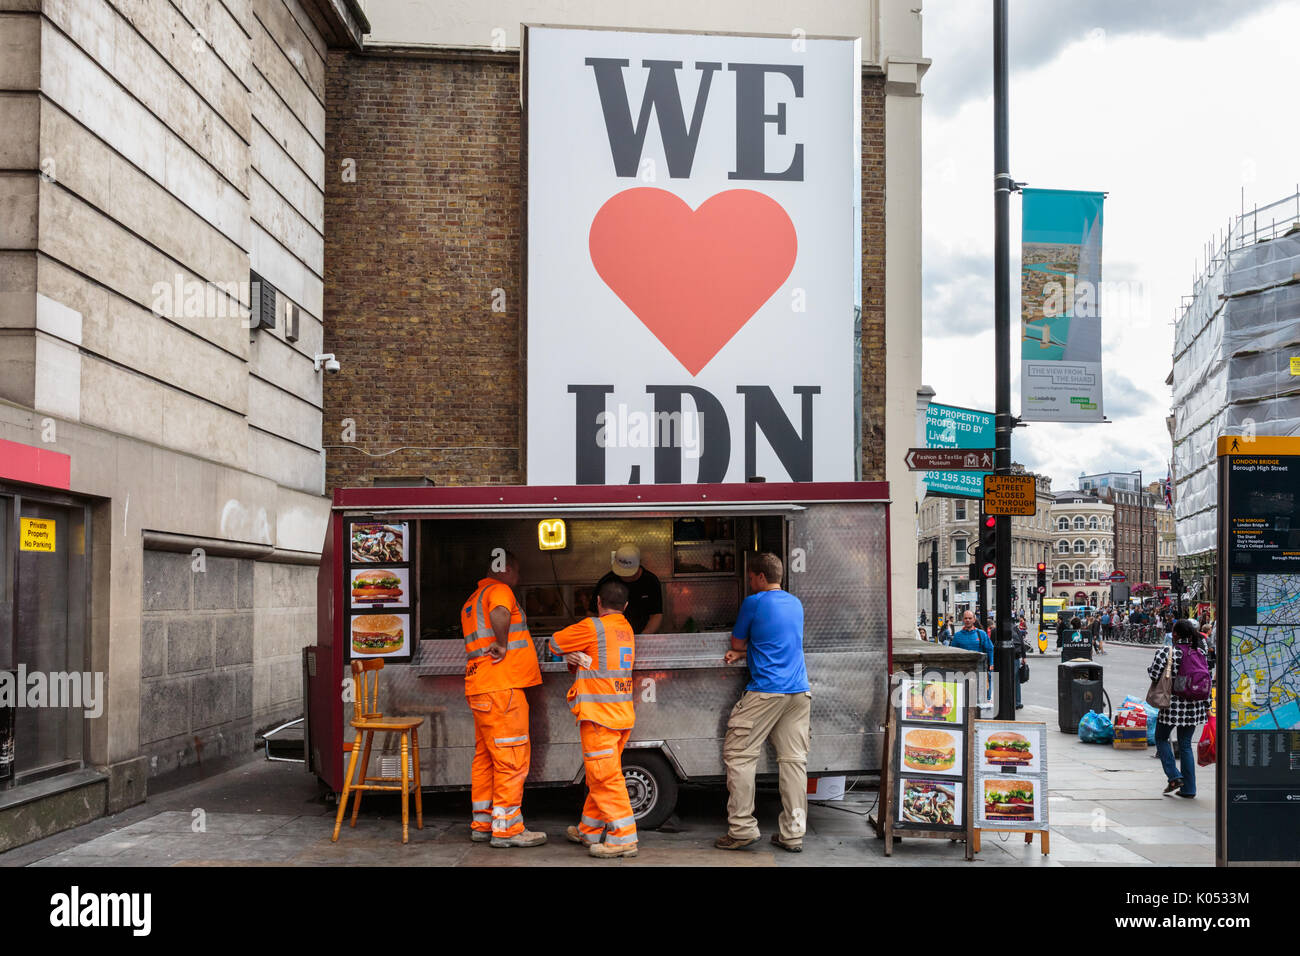 We love LND (London) sign above a food stall in Borough High Street, in reference to a previous terror attack, Borough Market, Borough High Street, Lo Stock Photo